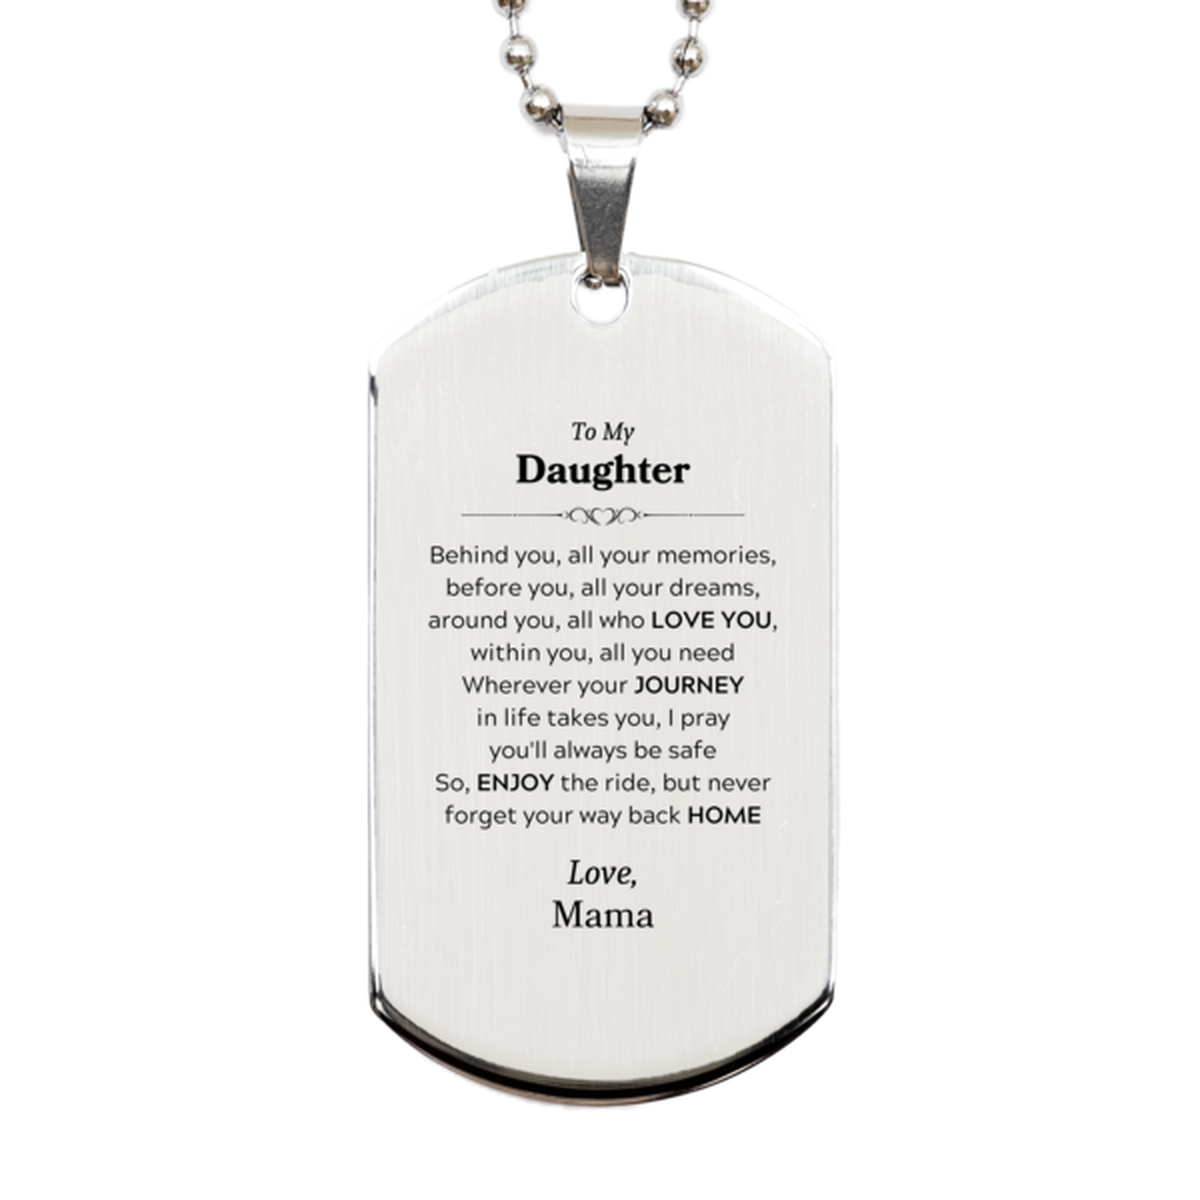 To My Daughter Graduation Gifts from Mama, Daughter Silver Dog Tag Christmas Birthday Gifts for Daughter Behind you, all your memories, before you, all your dreams. Love, Mama